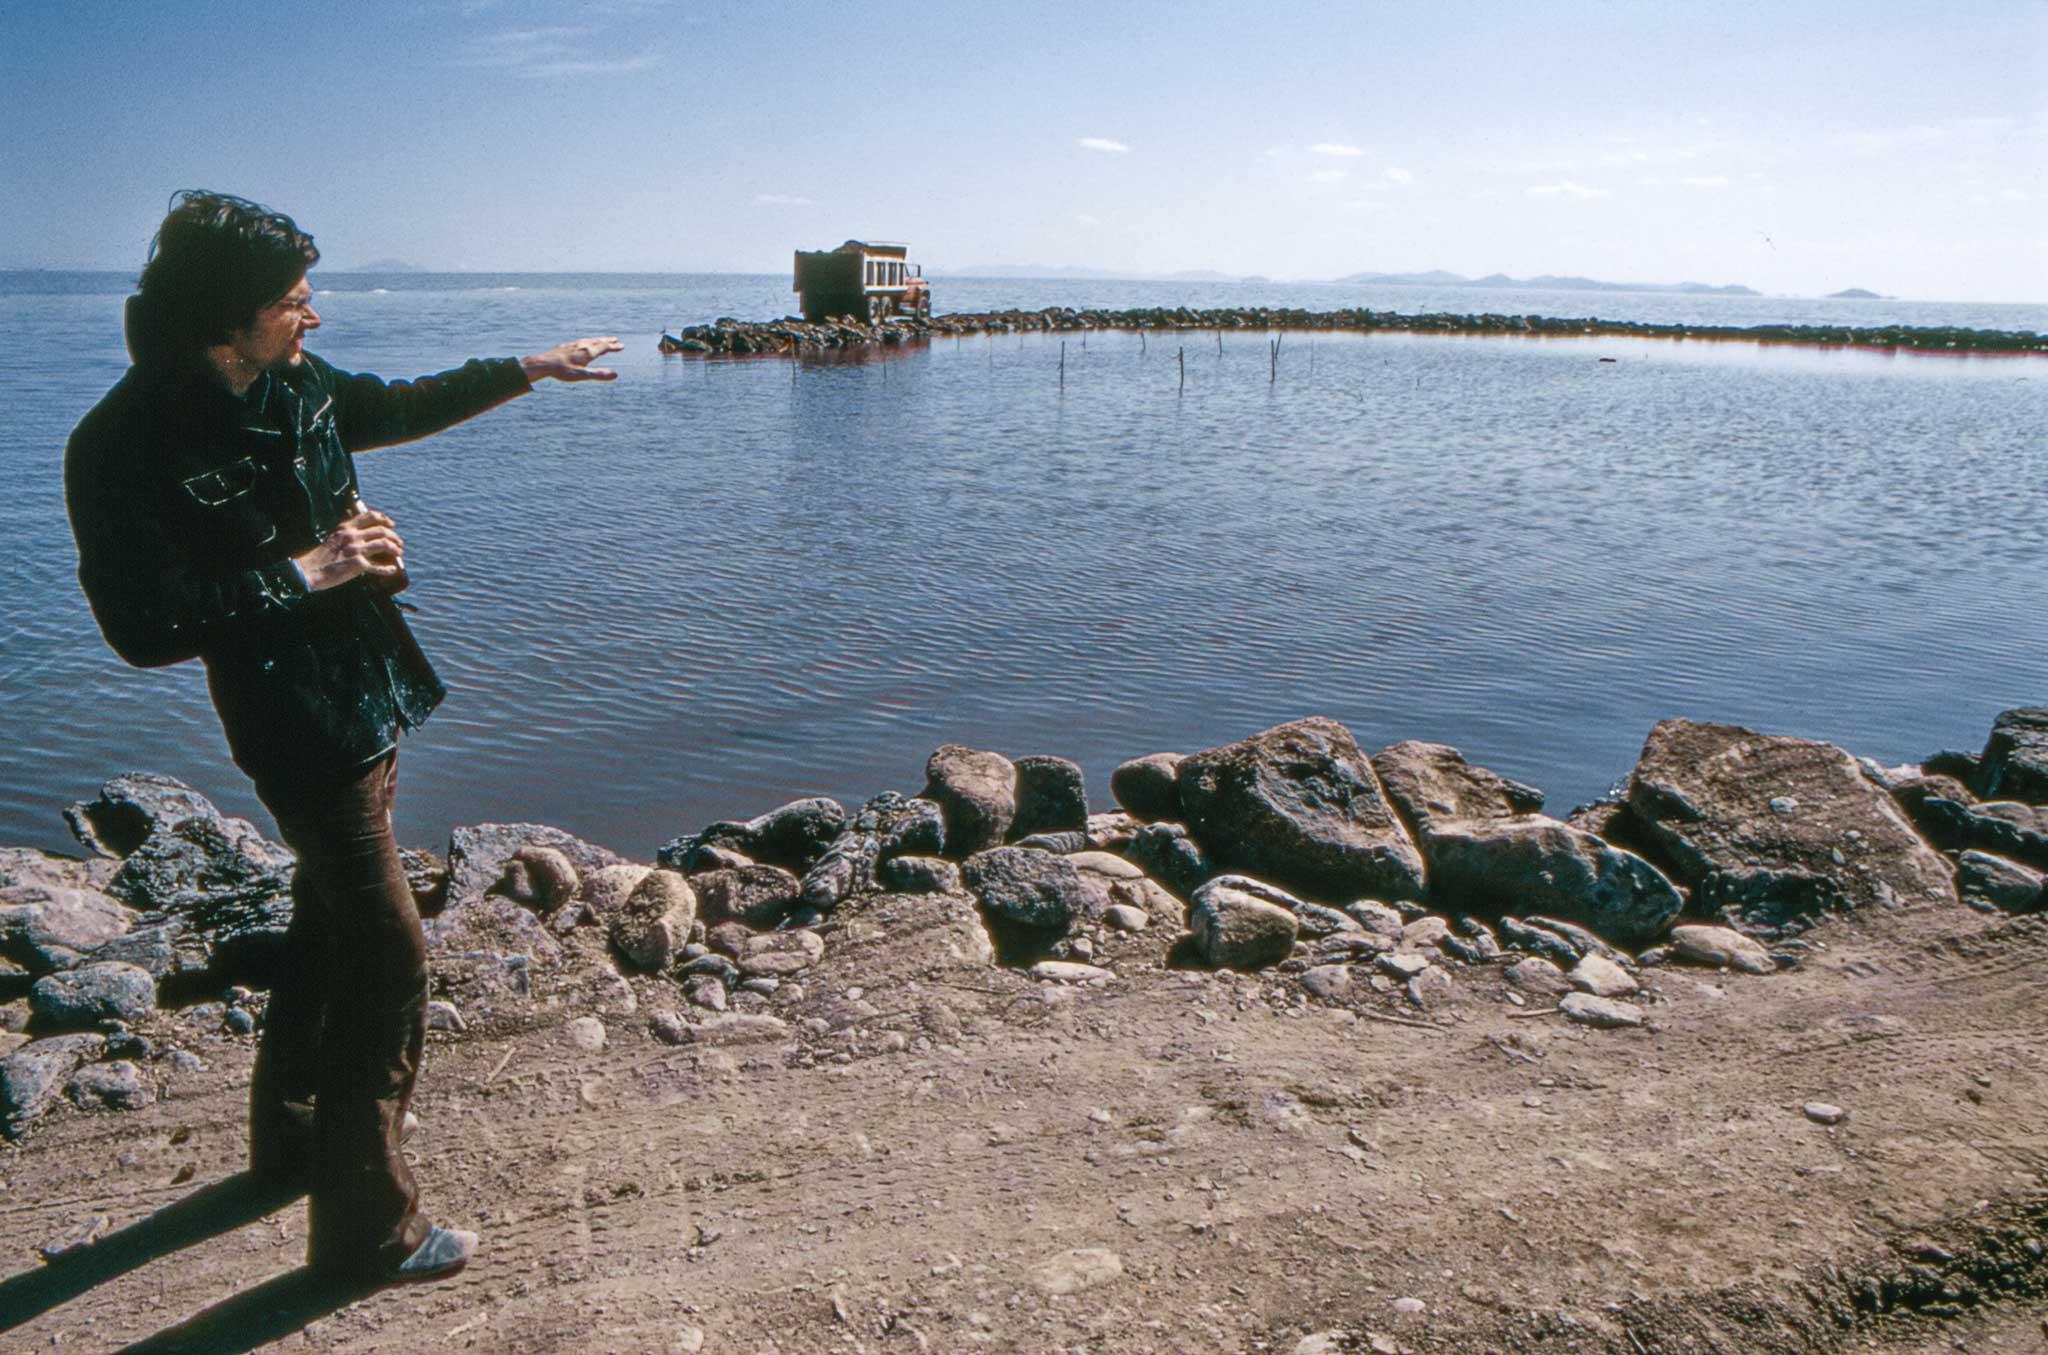 Man standing on the left side of the frame gesturing toward a jetty of land and a truck on the water